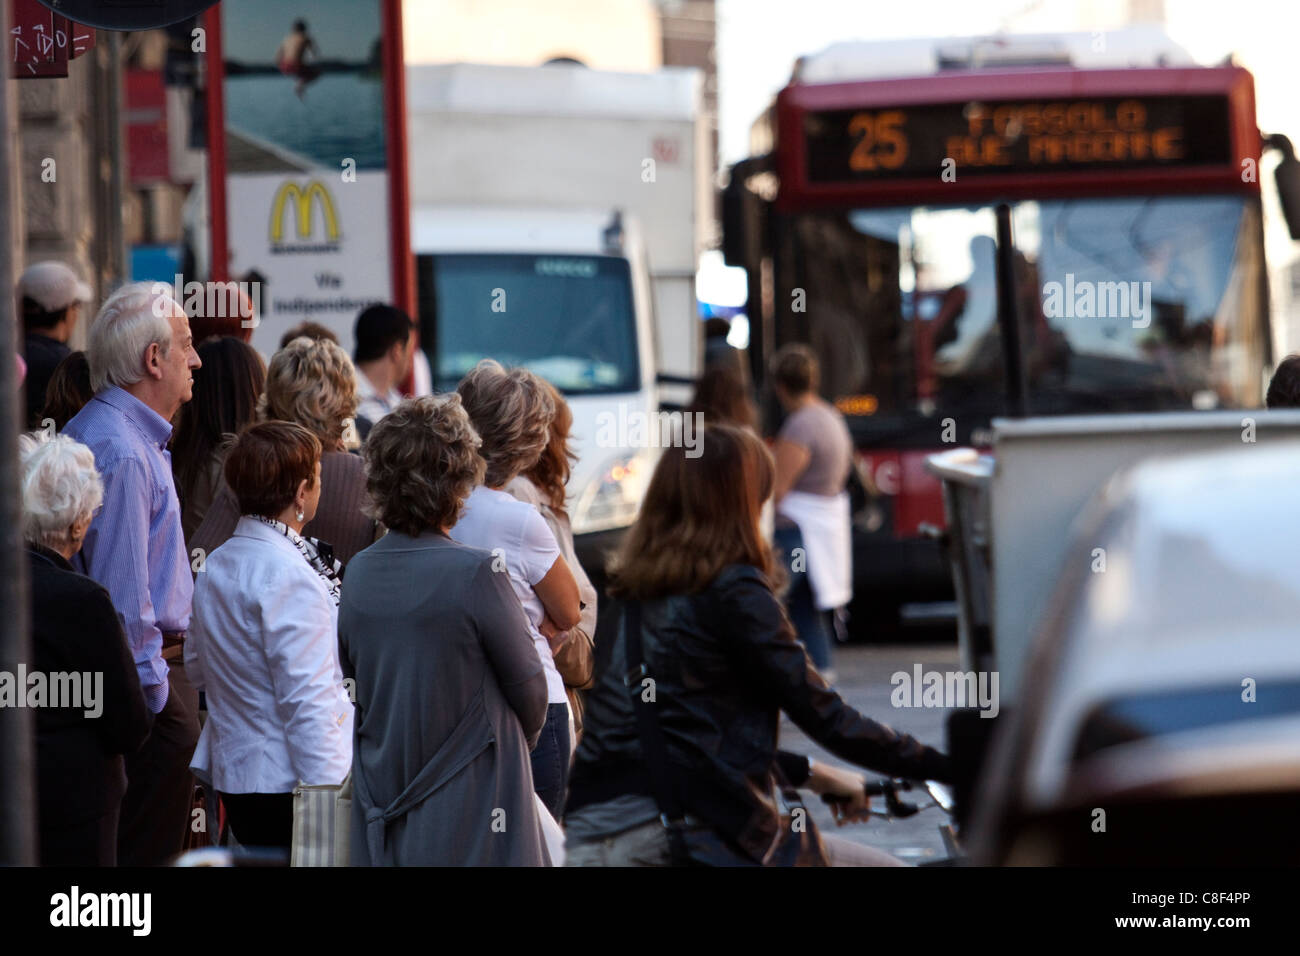 People queue at the bus stop in their routine life. Stock Photo